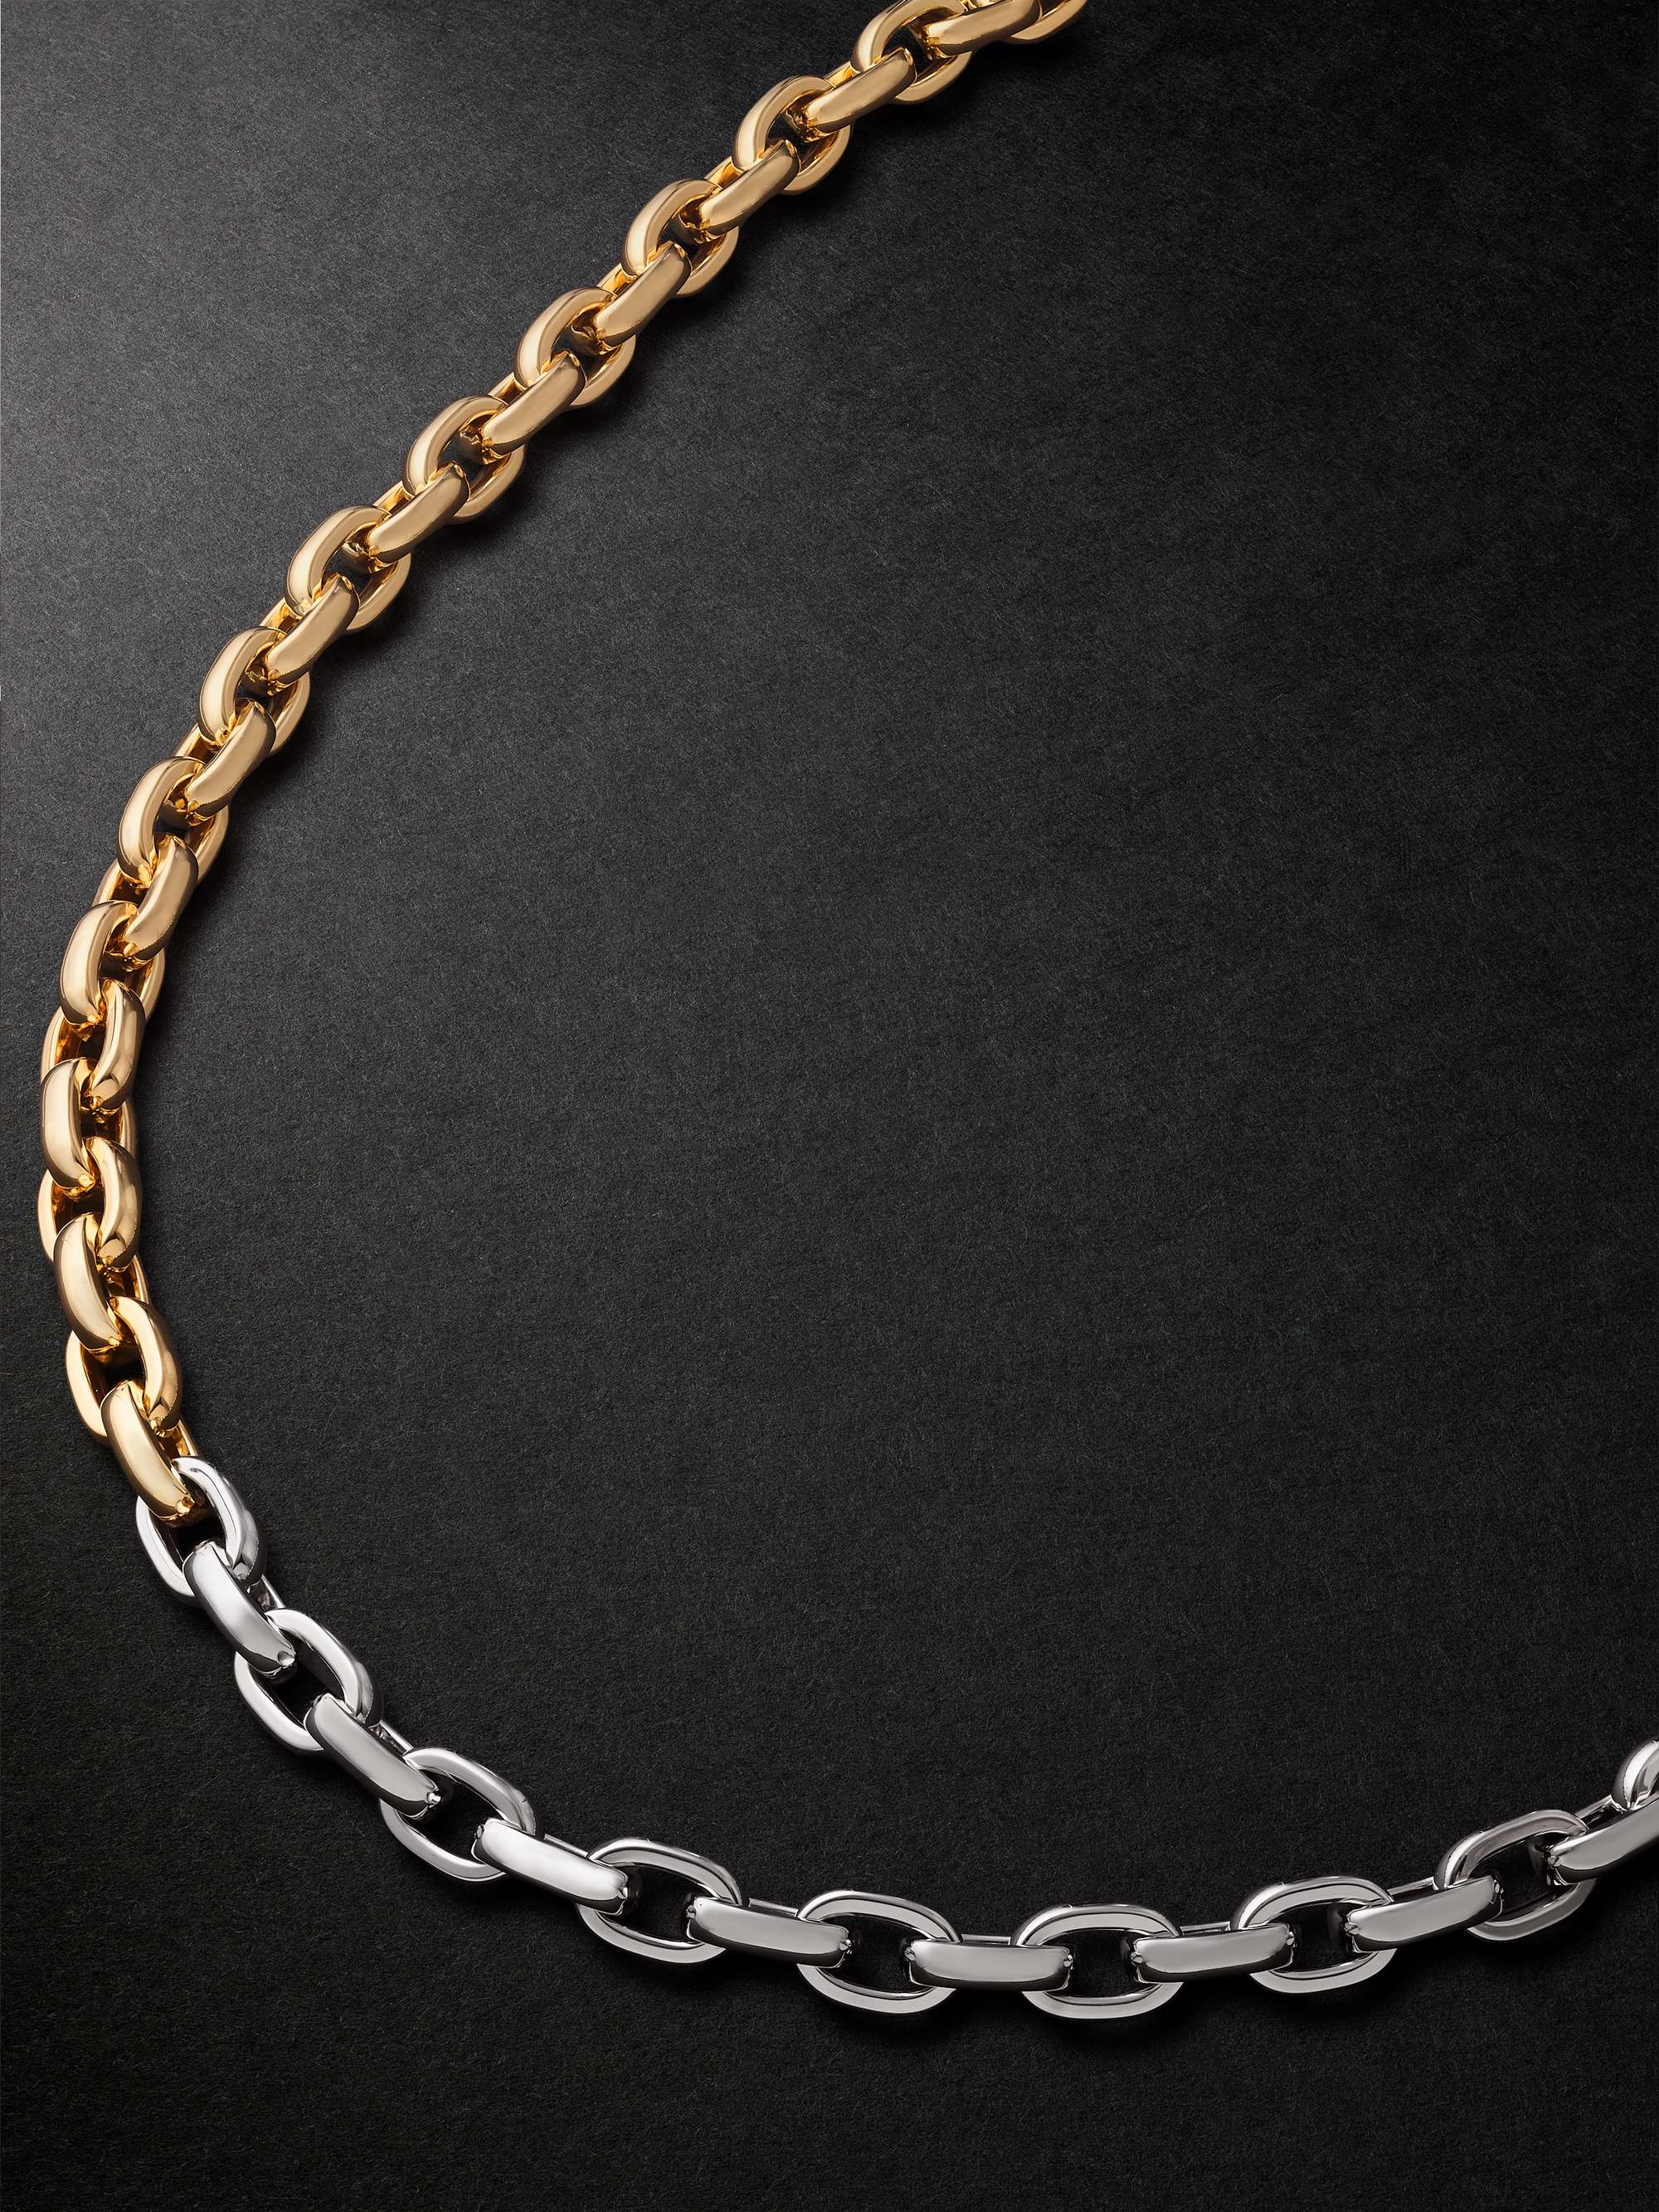 AS29 Bold Links Yellow and White Gold Chain Necklace